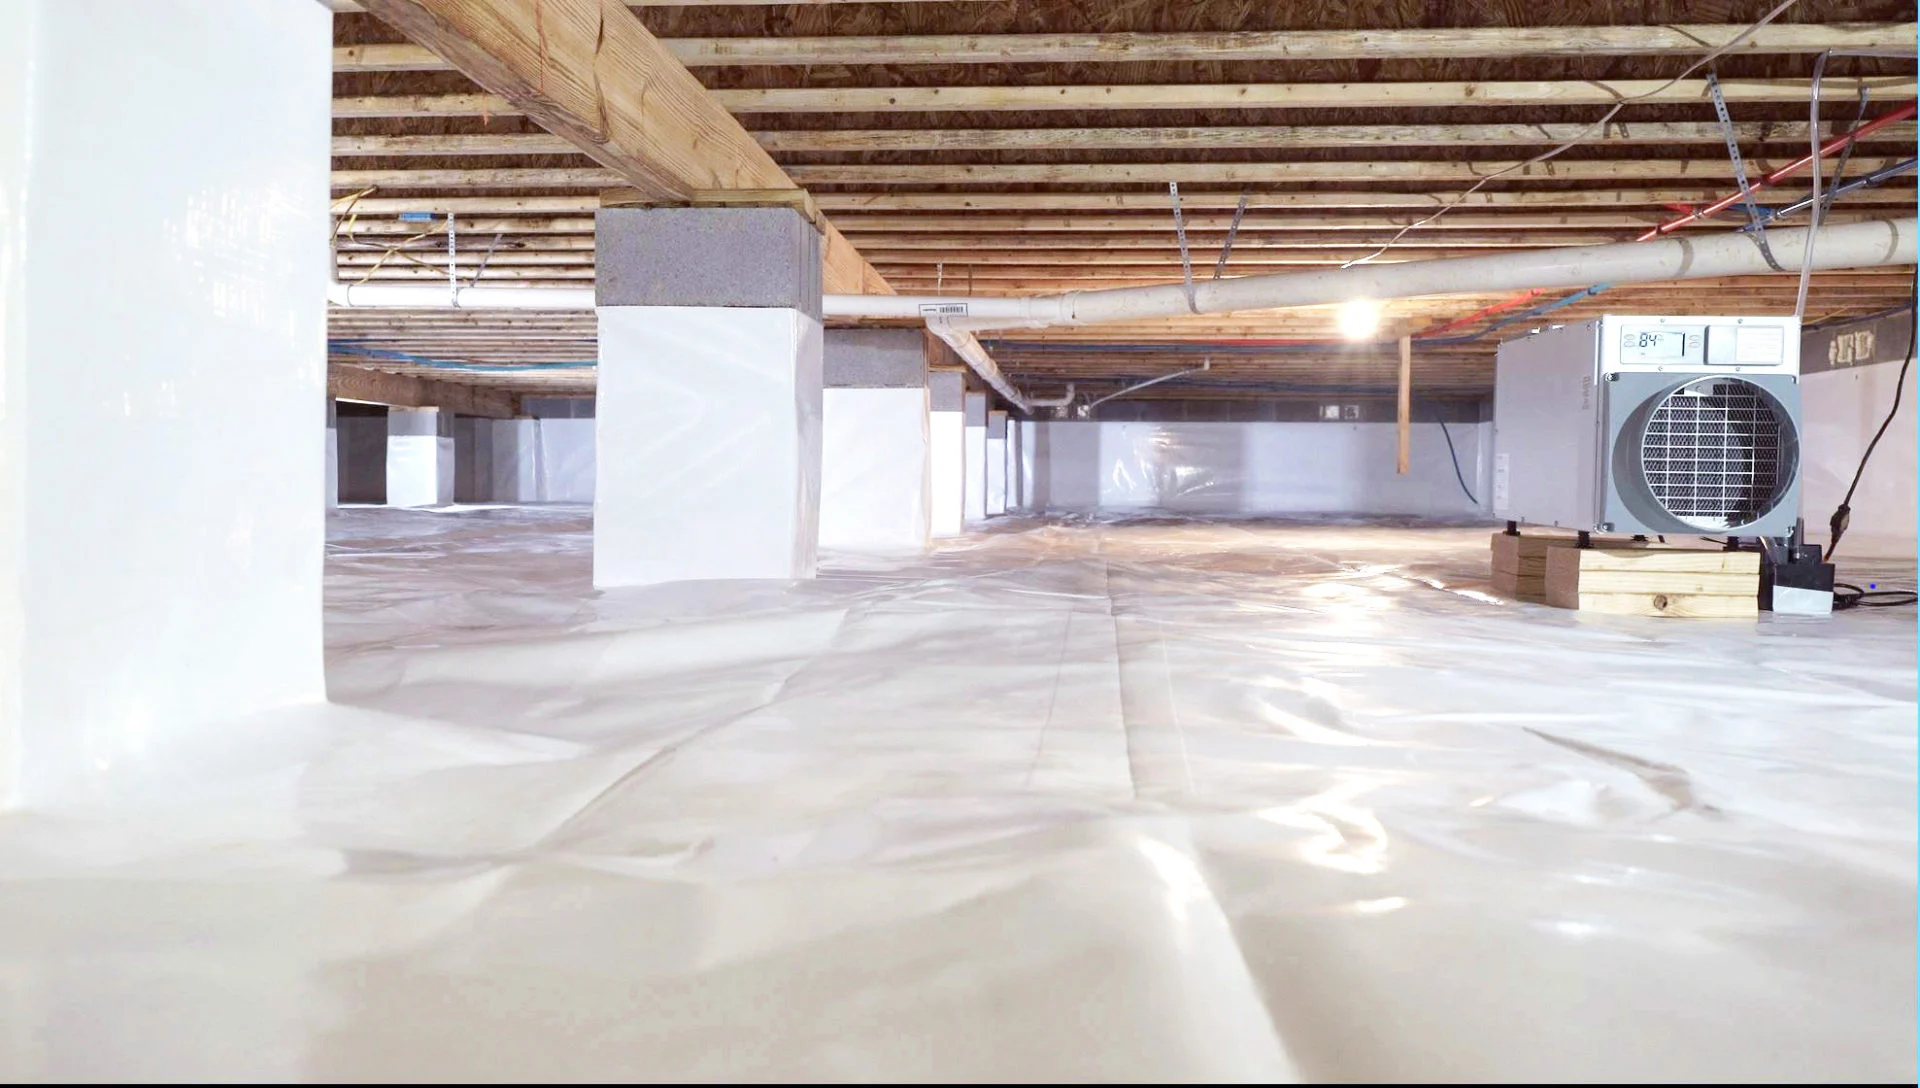 How To Support Floor Joists In A Crawl Space